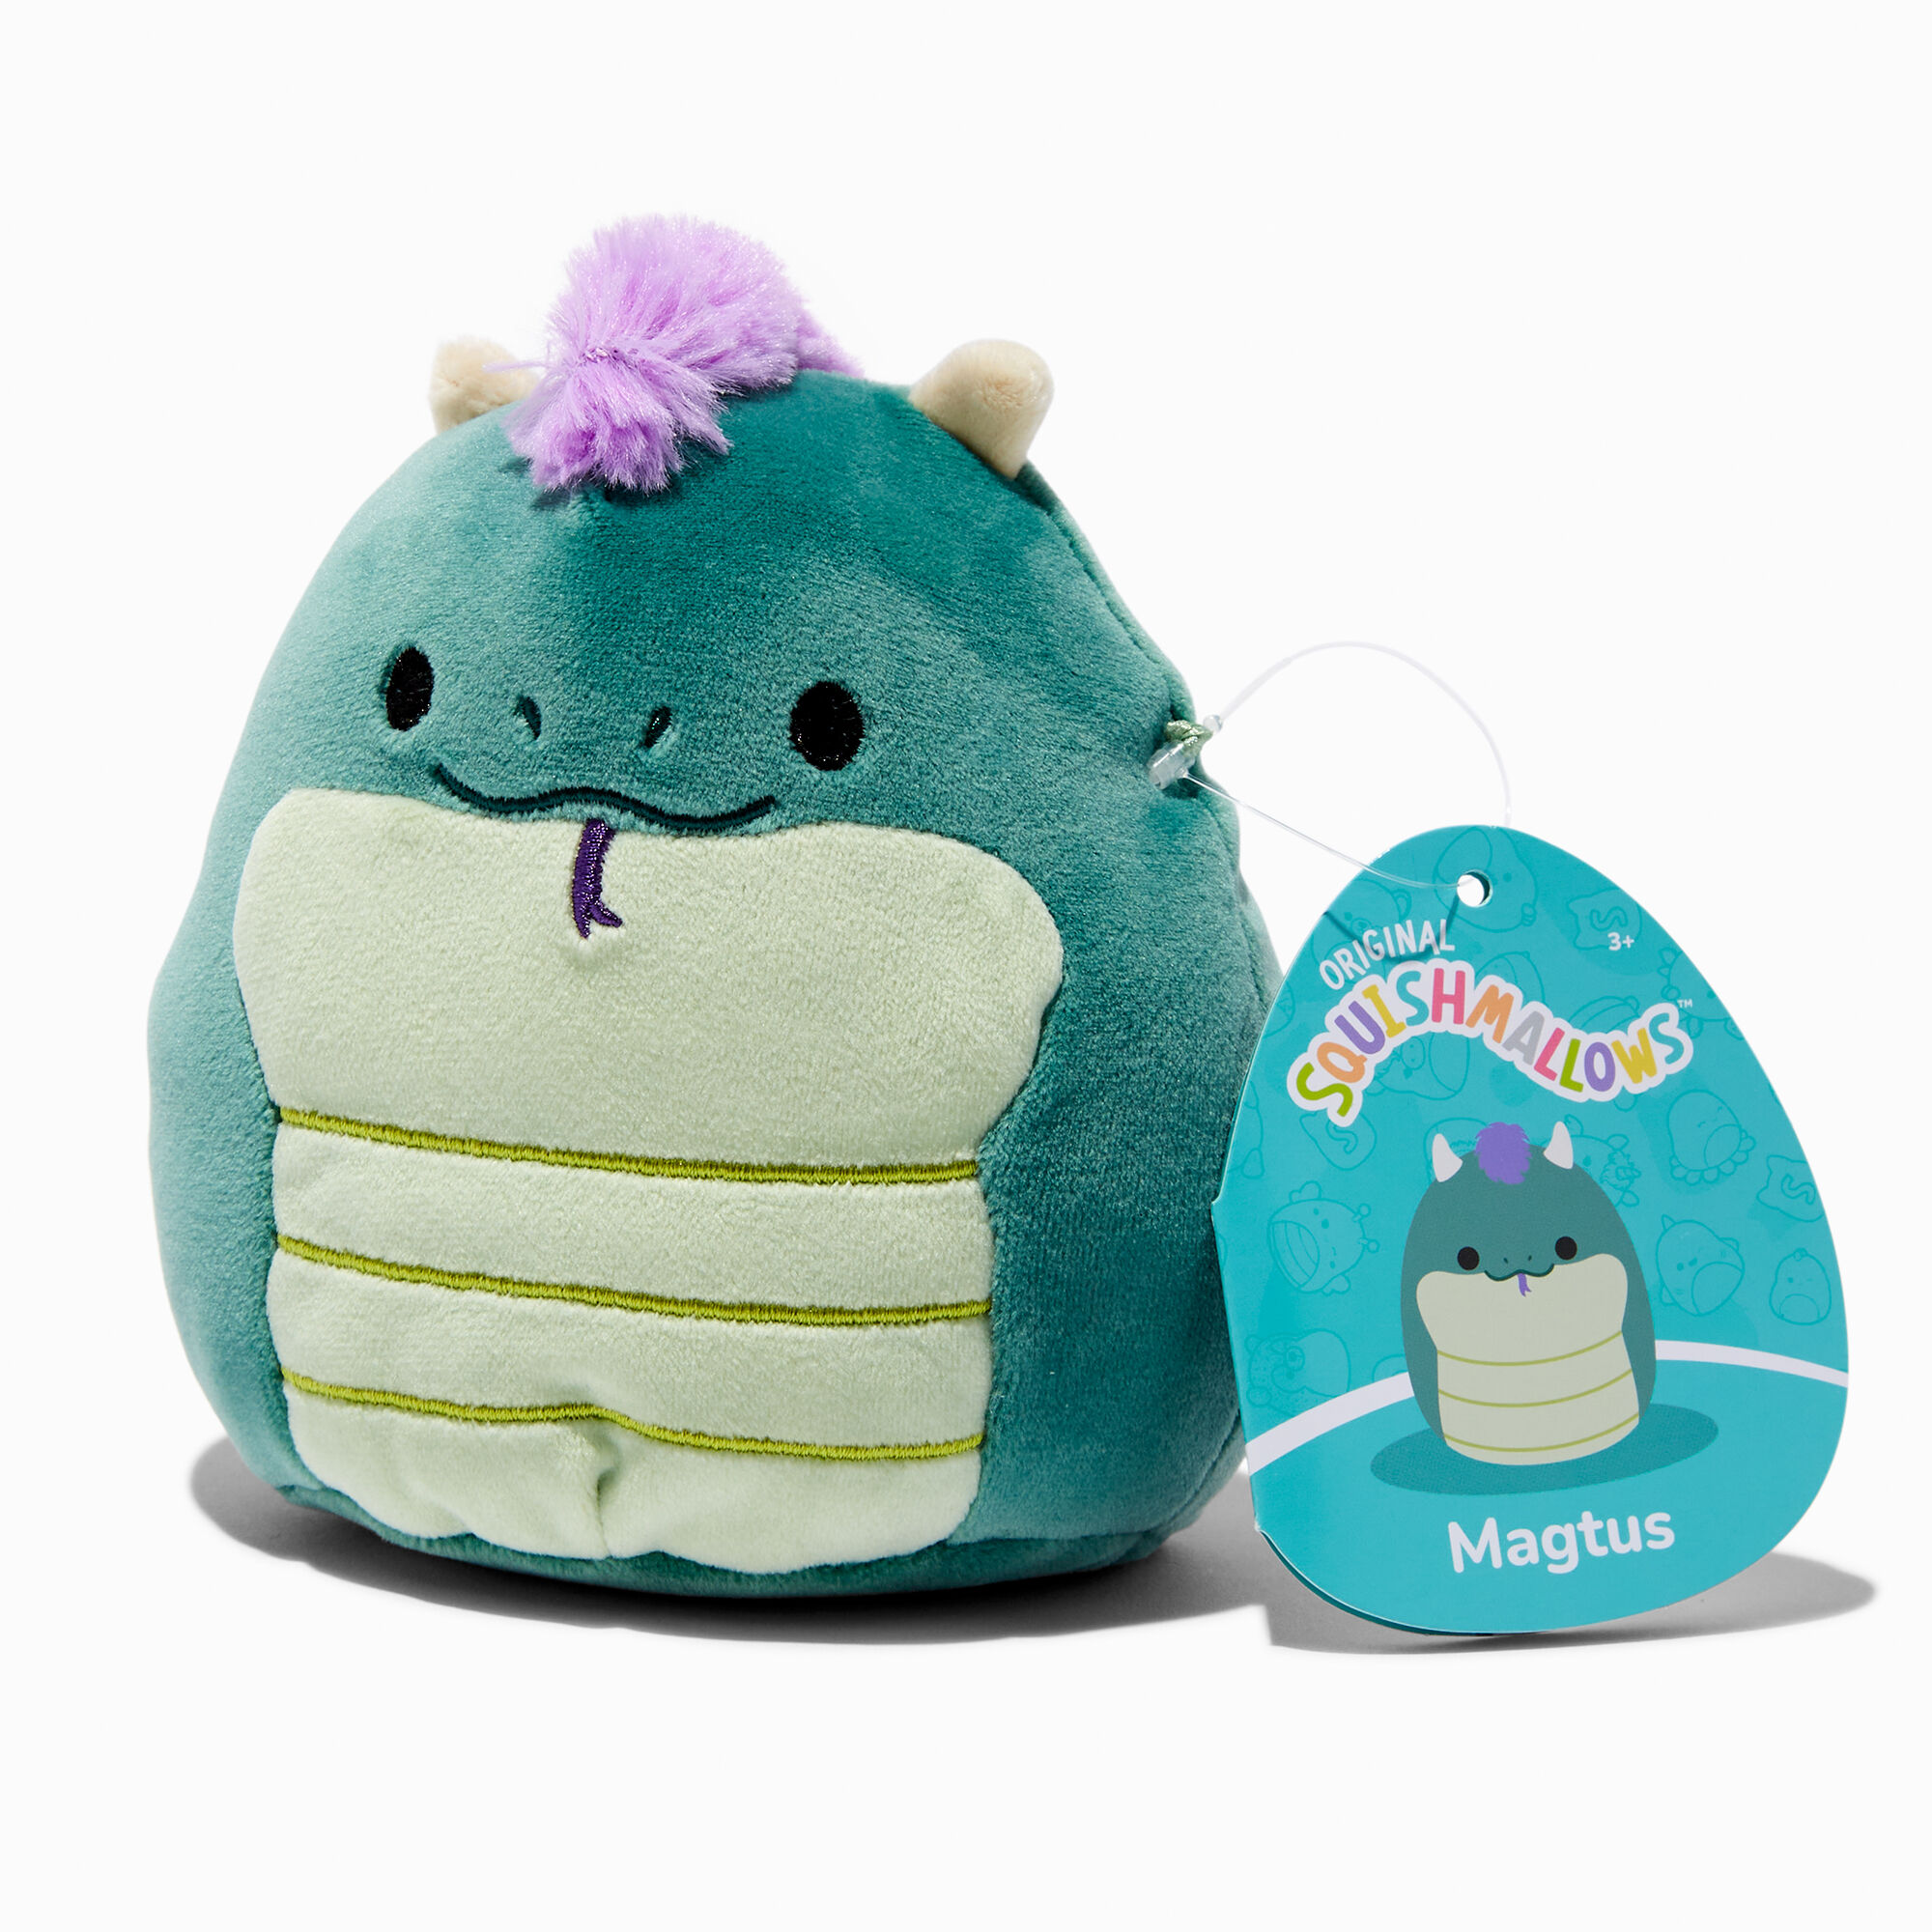 View Claires Squishmallows 5 Magtus Basilisk Soft Toy information